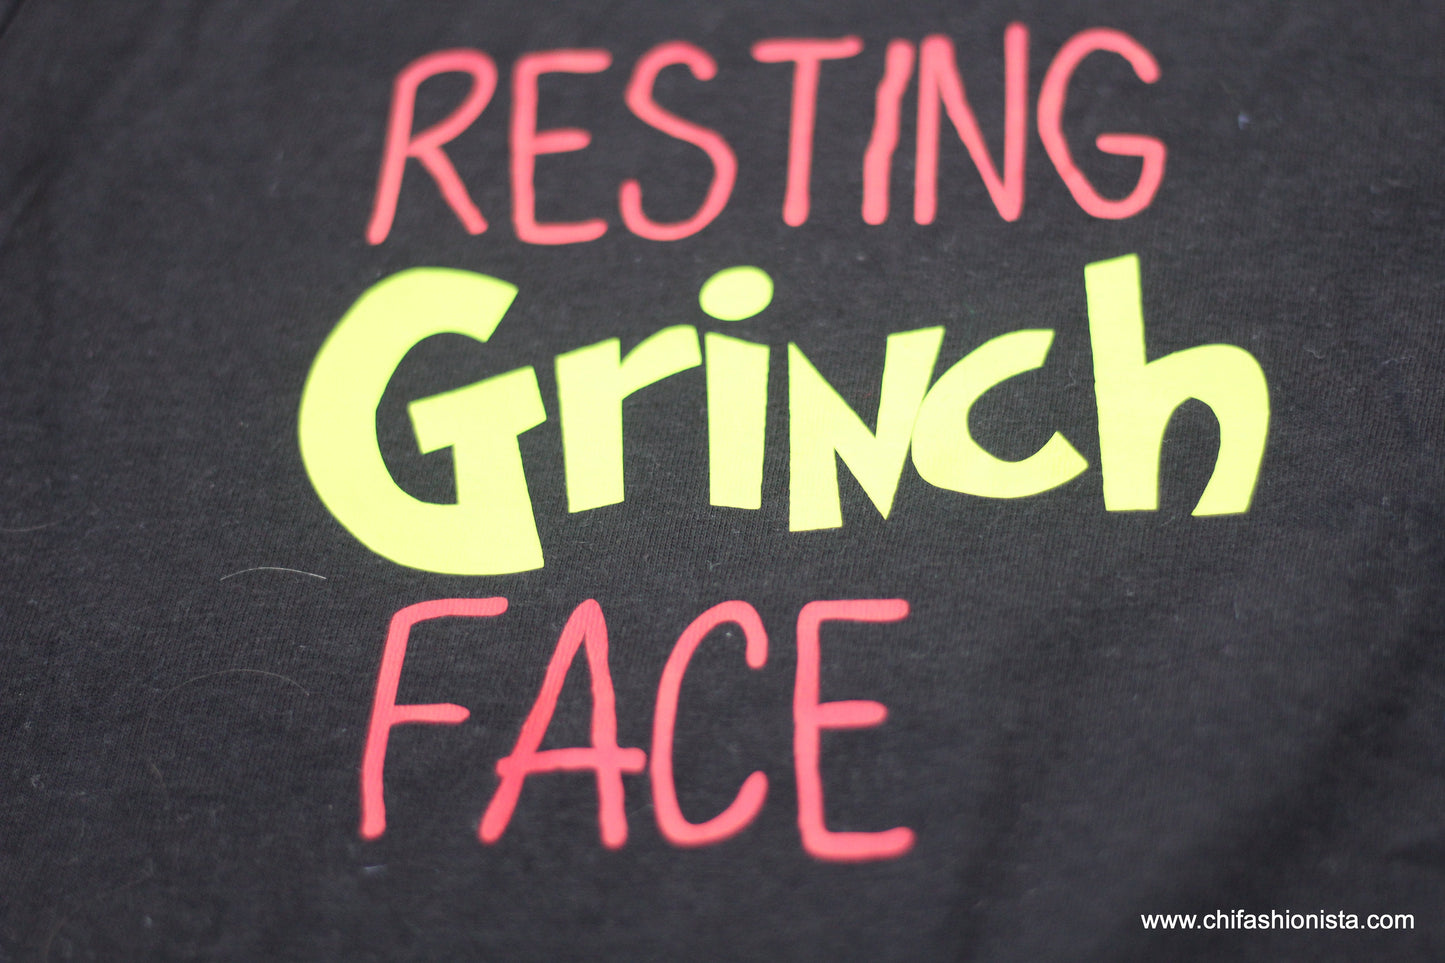 Resting Grinch Face-Adult -Suess